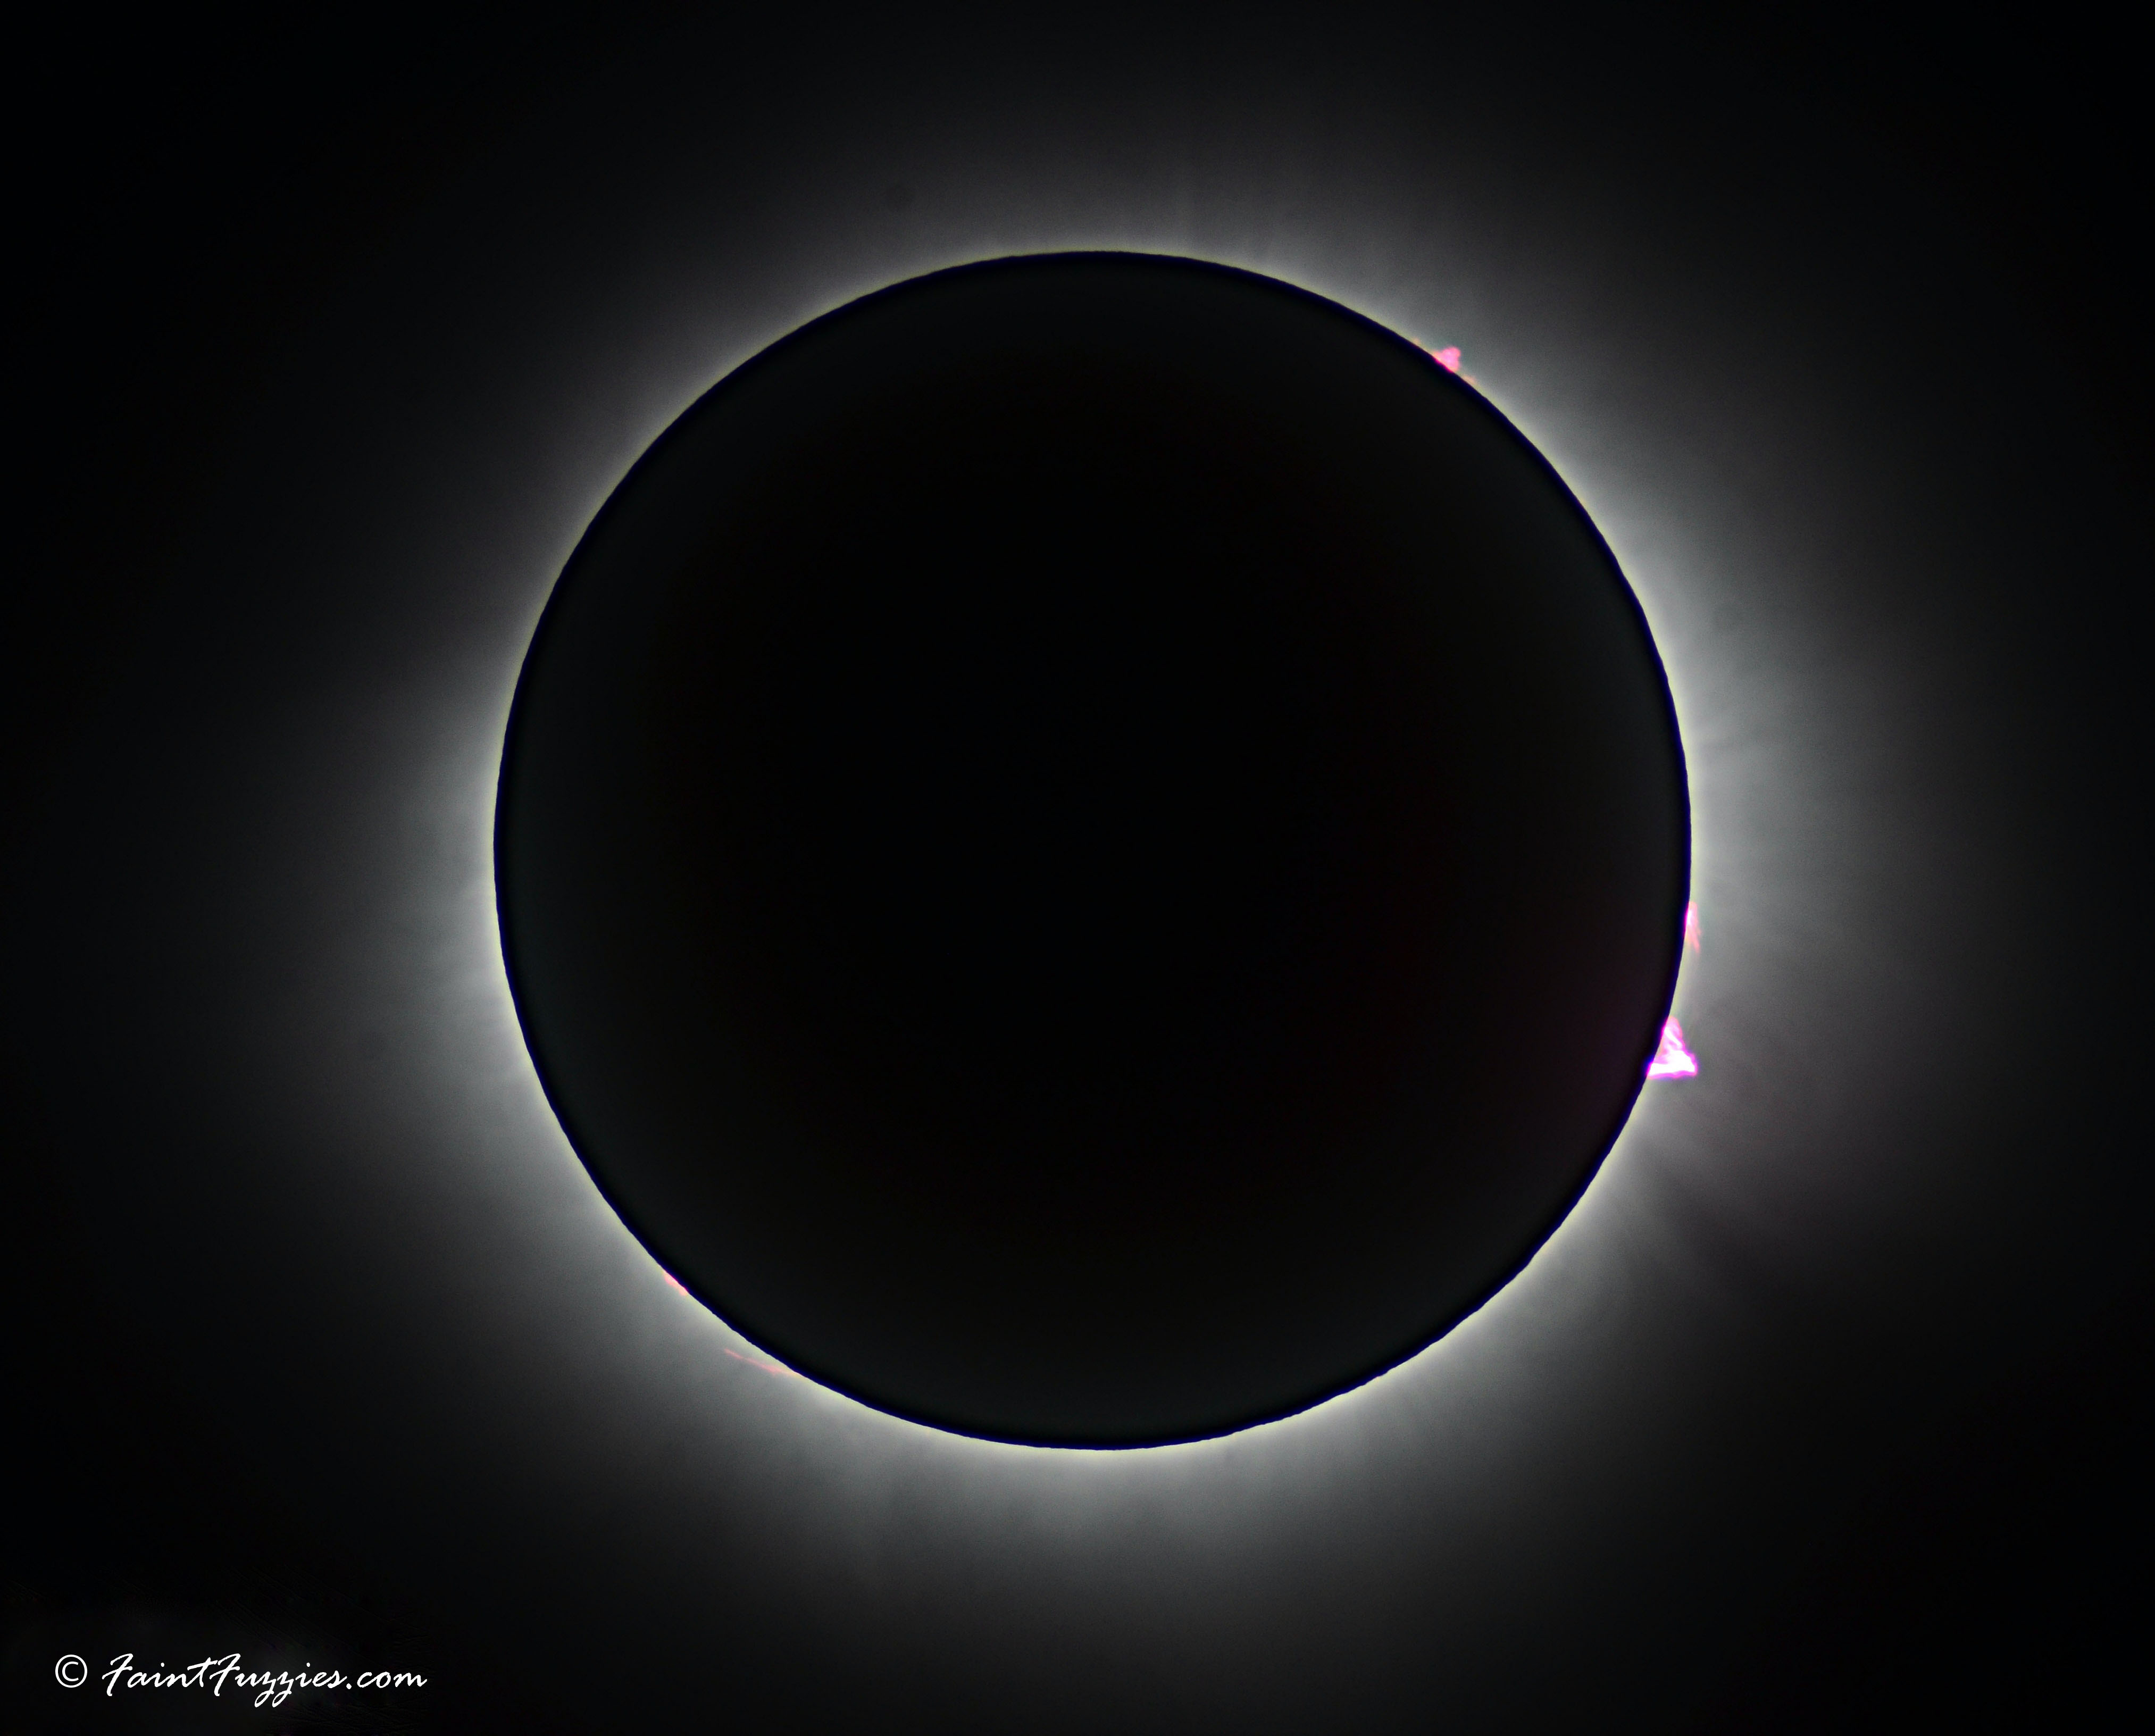 Corona with Prominences